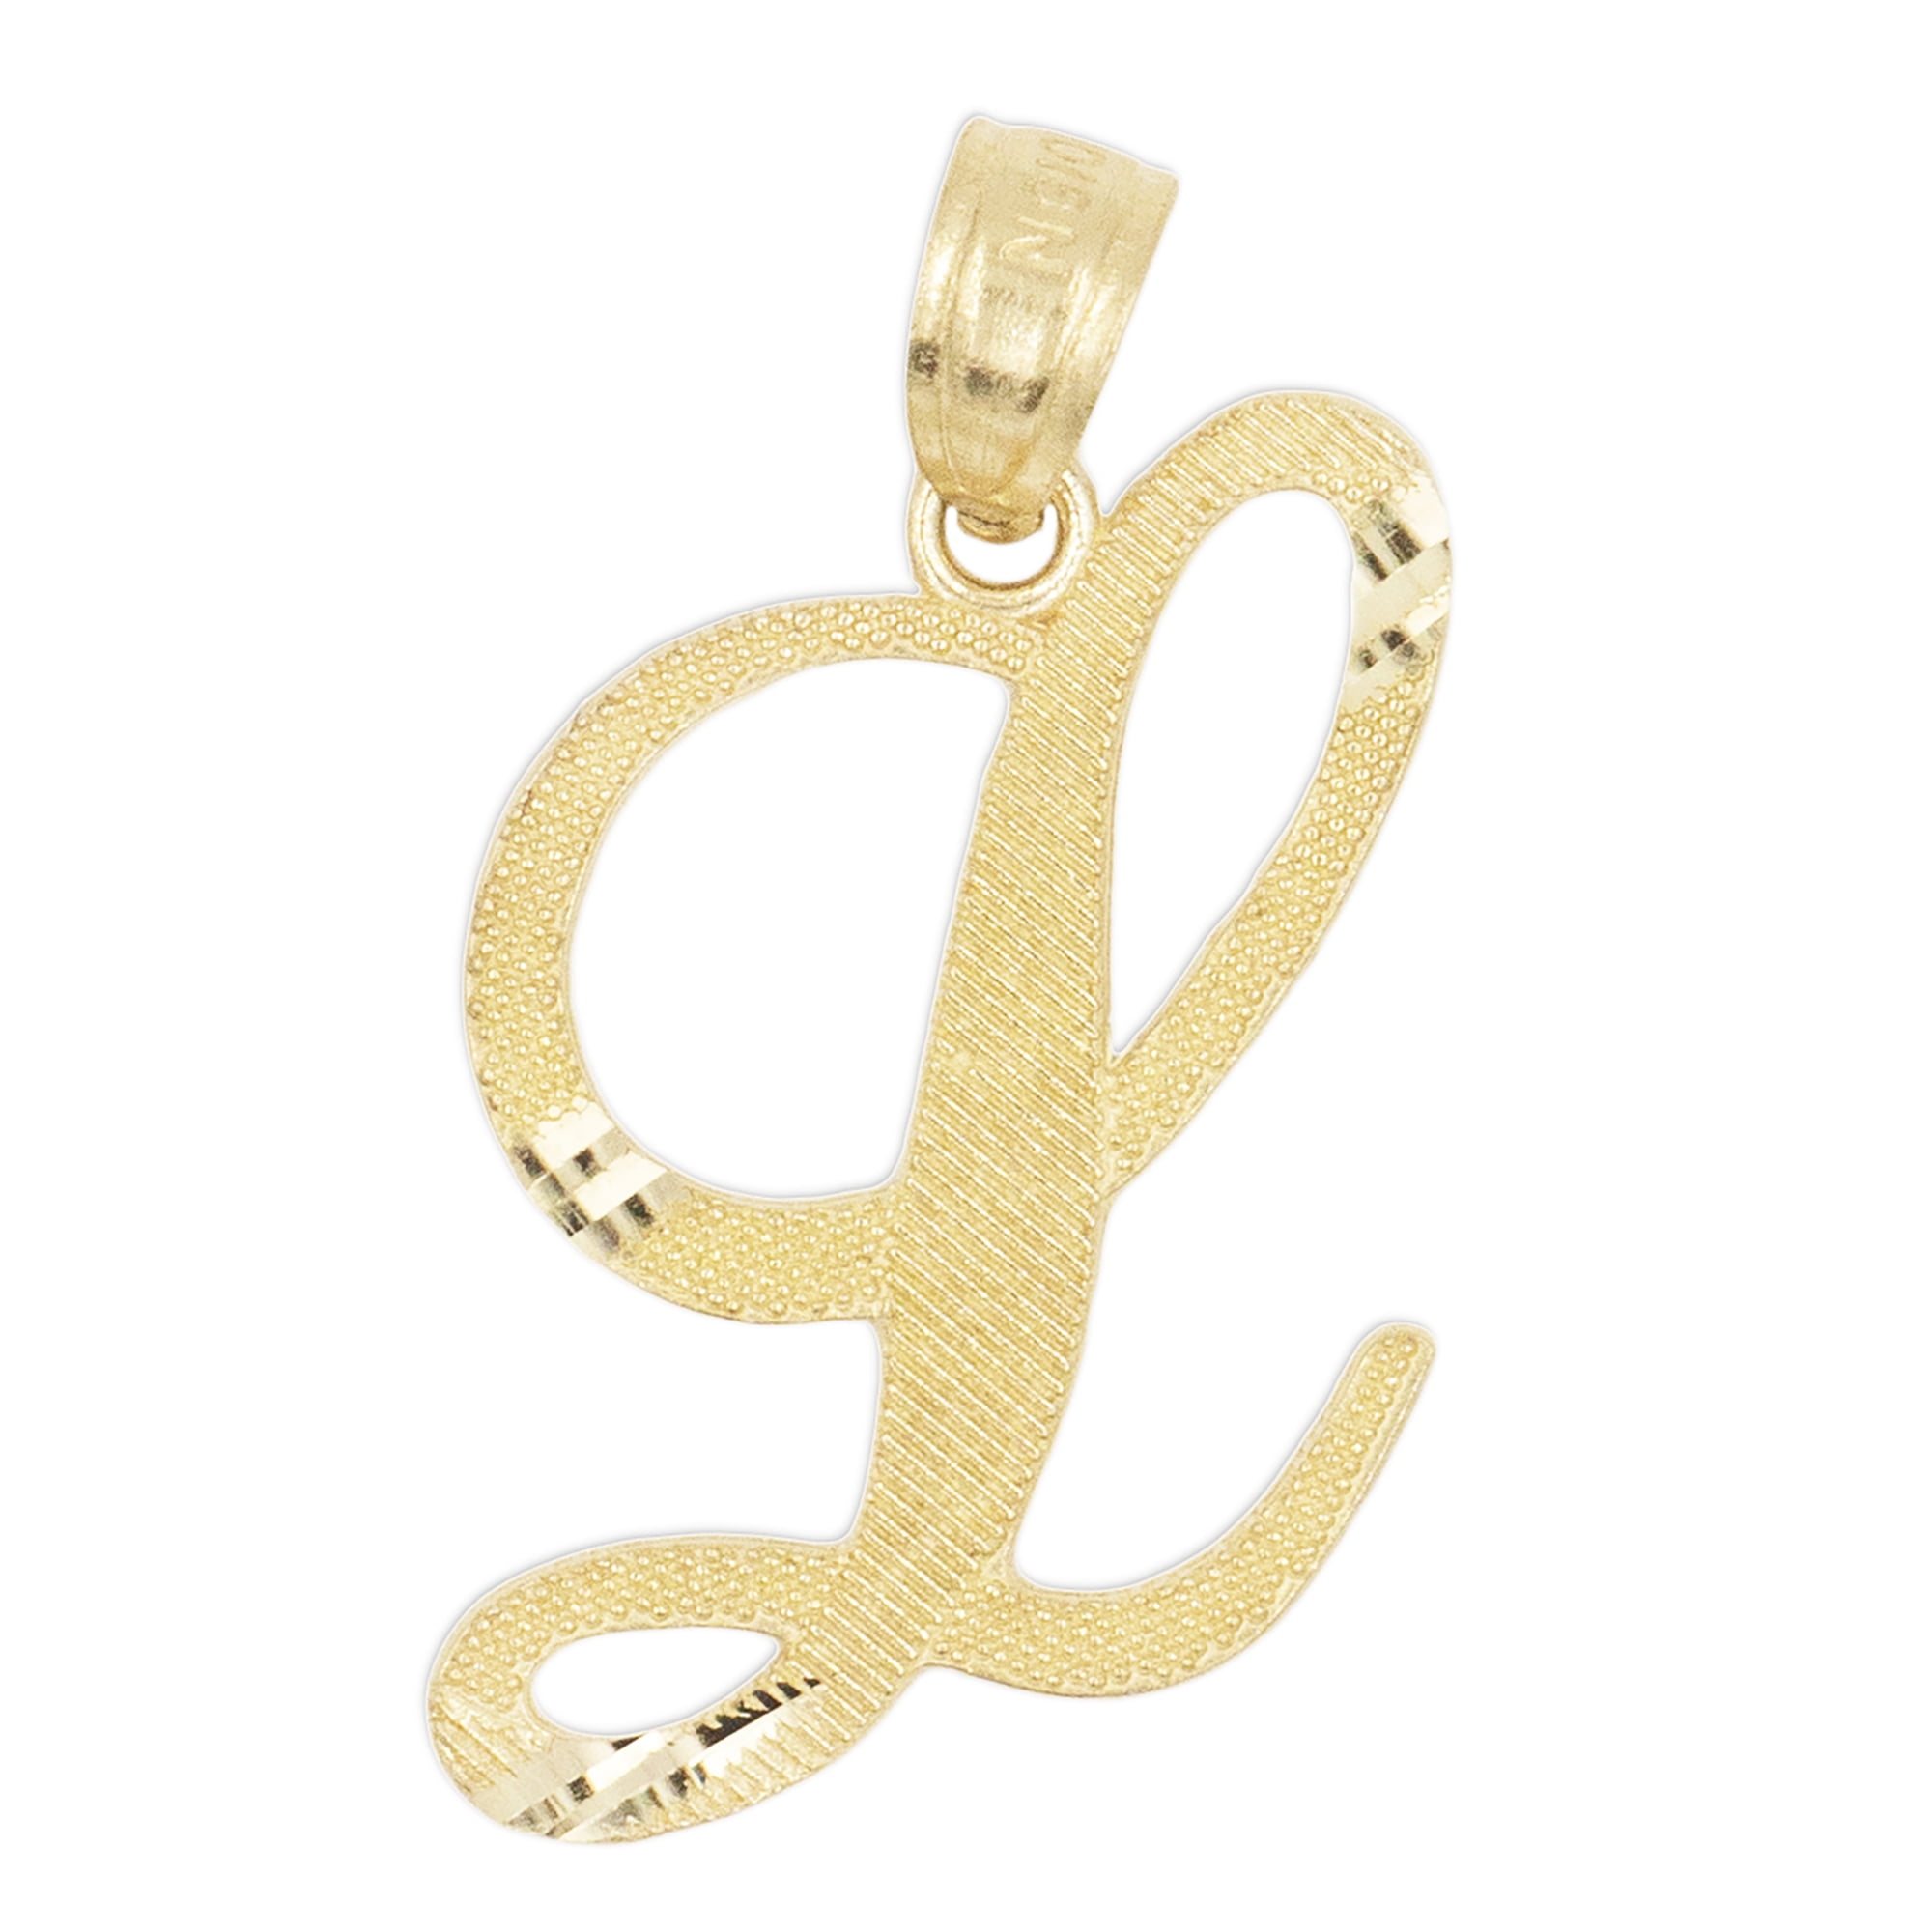 jewelry name charms for jewelry making initial necklaces 1907-BR-G 4 Letter G charms for personalized jewelry